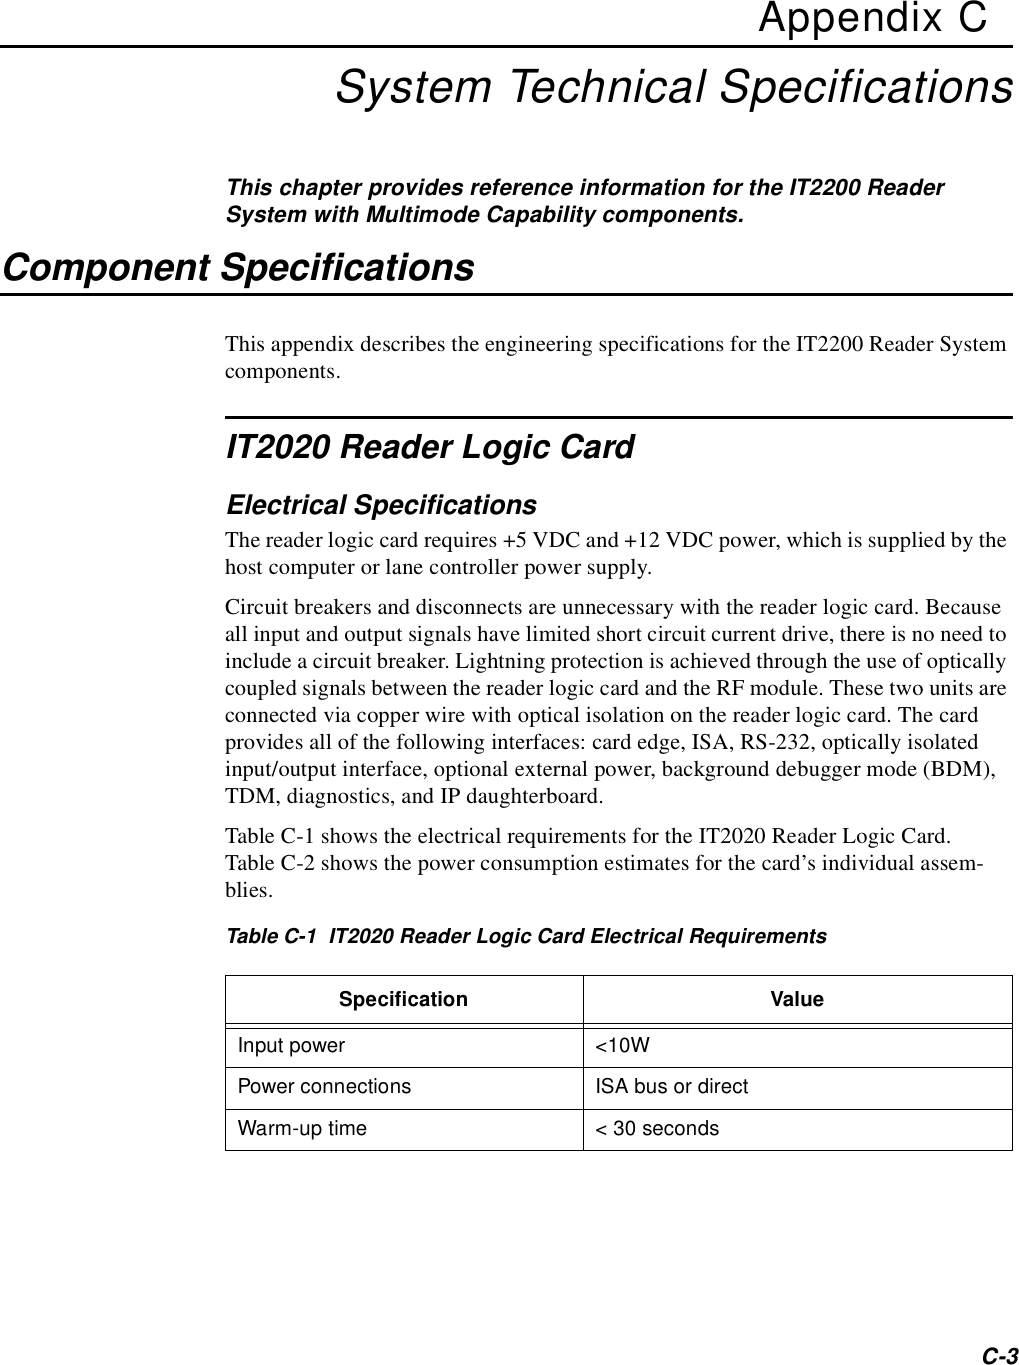 C-3Appendix CSystem Technical SpecificationsThis chapter provides reference information for the IT2200 Reader System with Multimode Capability components.Component SpecificationsThis appendix describes the engineering specifications for the IT2200 Reader System components.IT2020 Reader Logic CardElectrical SpecificationsThe reader logic card requires +5 VDC and +12 VDC power, which is supplied by the host computer or lane controller power supply.Circuit breakers and disconnects are unnecessary with the reader logic card. Because all input and output signals have limited short circuit current drive, there is no need to include a circuit breaker. Lightning protection is achieved through the use of optically coupled signals between the reader logic card and the RF module. These two units are connected via copper wire with optical isolation on the reader logic card. The card provides all of the following interfaces: card edge, ISA, RS-232, optically isolated input/output interface, optional external power, background debugger mode (BDM), TDM, diagnostics, and IP daughterboard.Table C-1 shows the electrical requirements for the IT2020 Reader Logic Card. Table C-2 shows the power consumption estimates for the card’s individual assem-blies.Table C-1  IT2020 Reader Logic Card Electrical RequirementsSpecification ValueInput power &lt;10WPower connections ISA bus or directWarm-up time &lt; 30 seconds